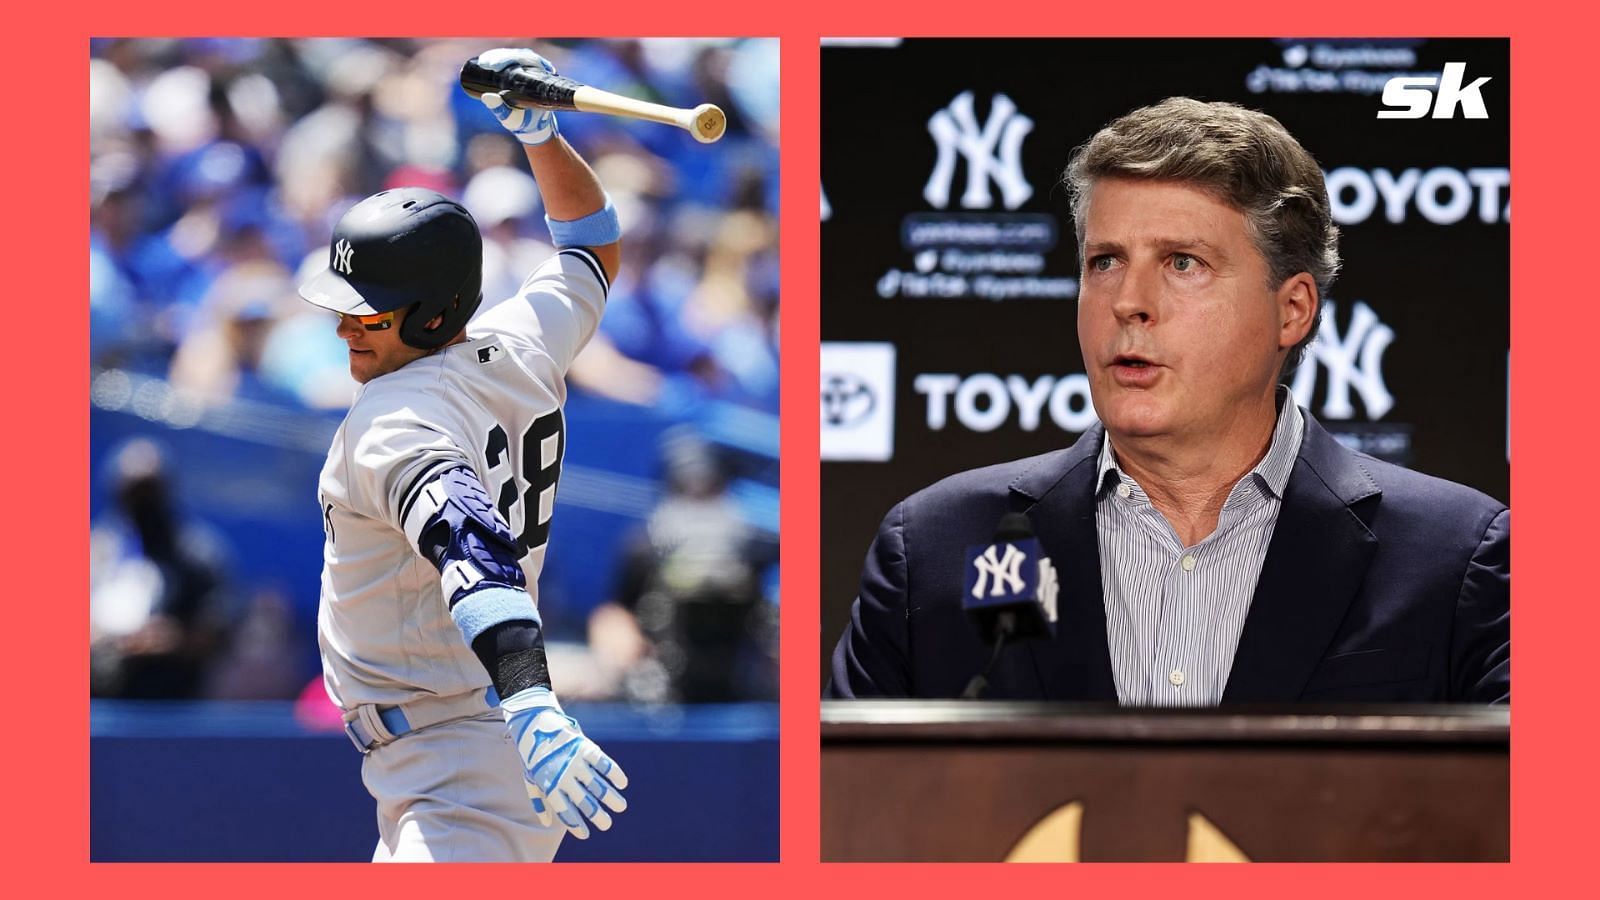 New York Yankees fans affronted by owner Hal Steinbrenner not understanding why they are upset at team&rsquo;s performance